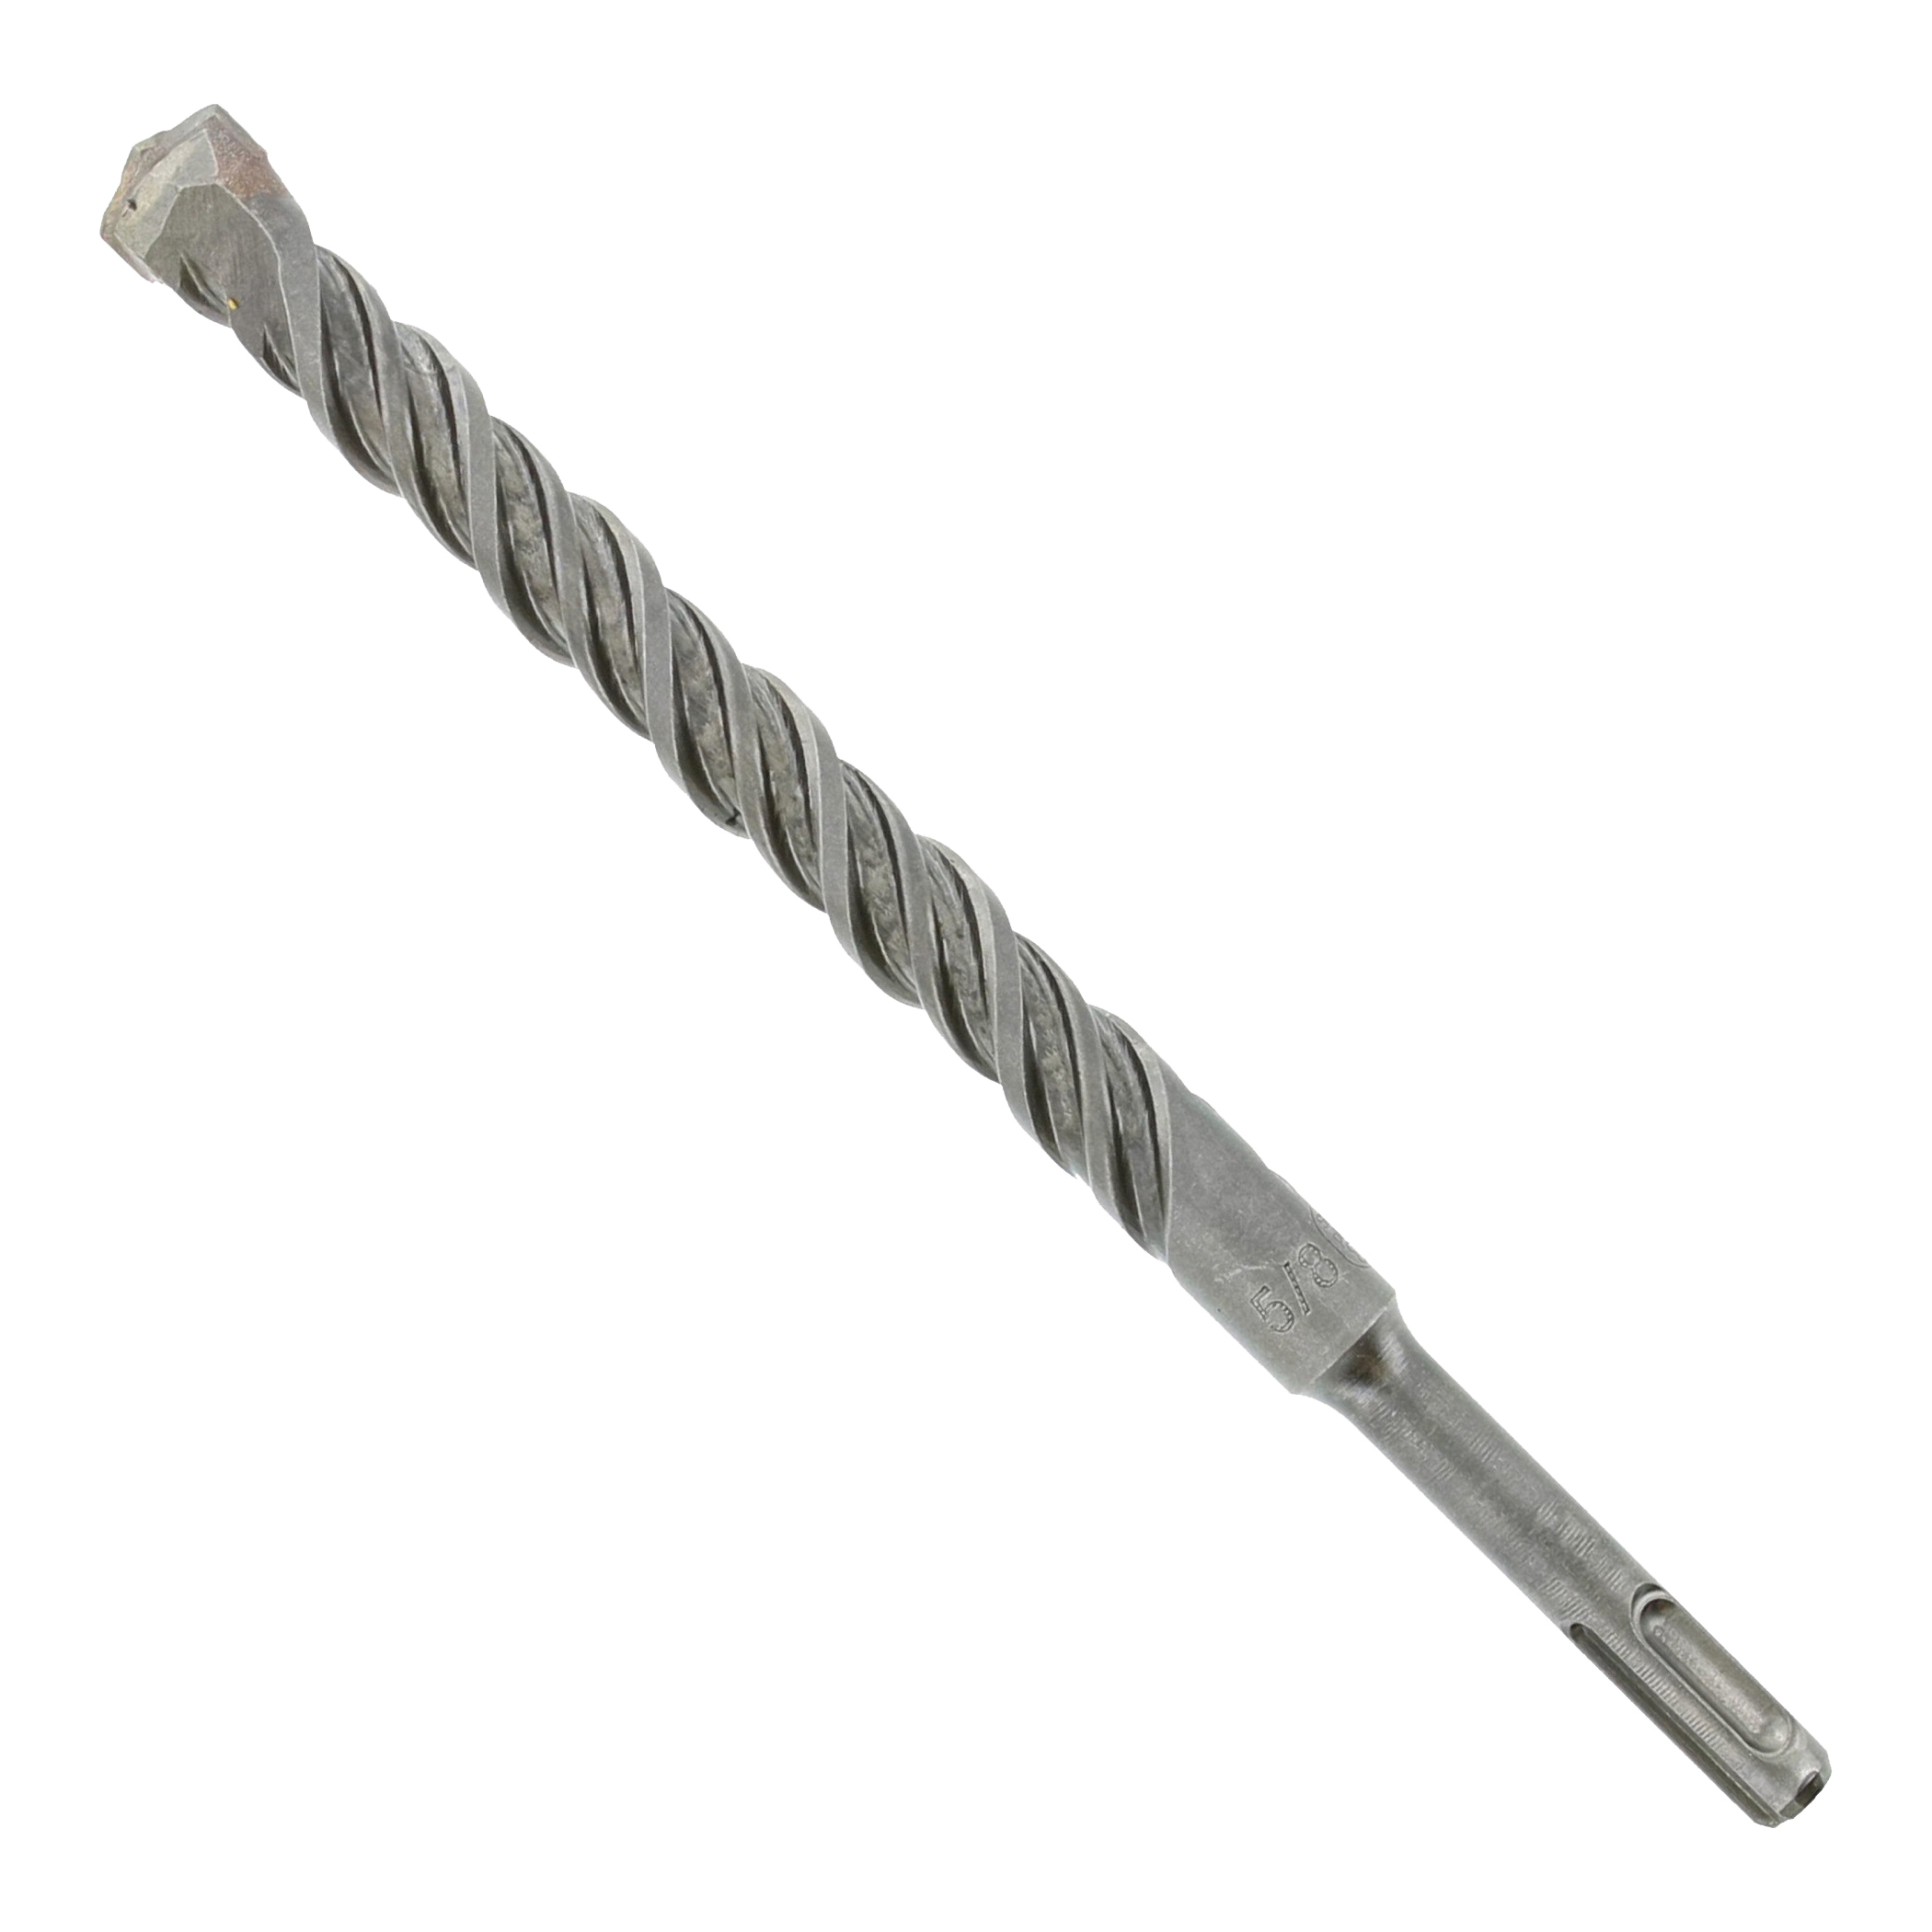 DMAPL2400 Hammer Drill Bit, 5/8 in Dia, 8 in OAL, Percussion, 4-Flute, SDS Plus Shank